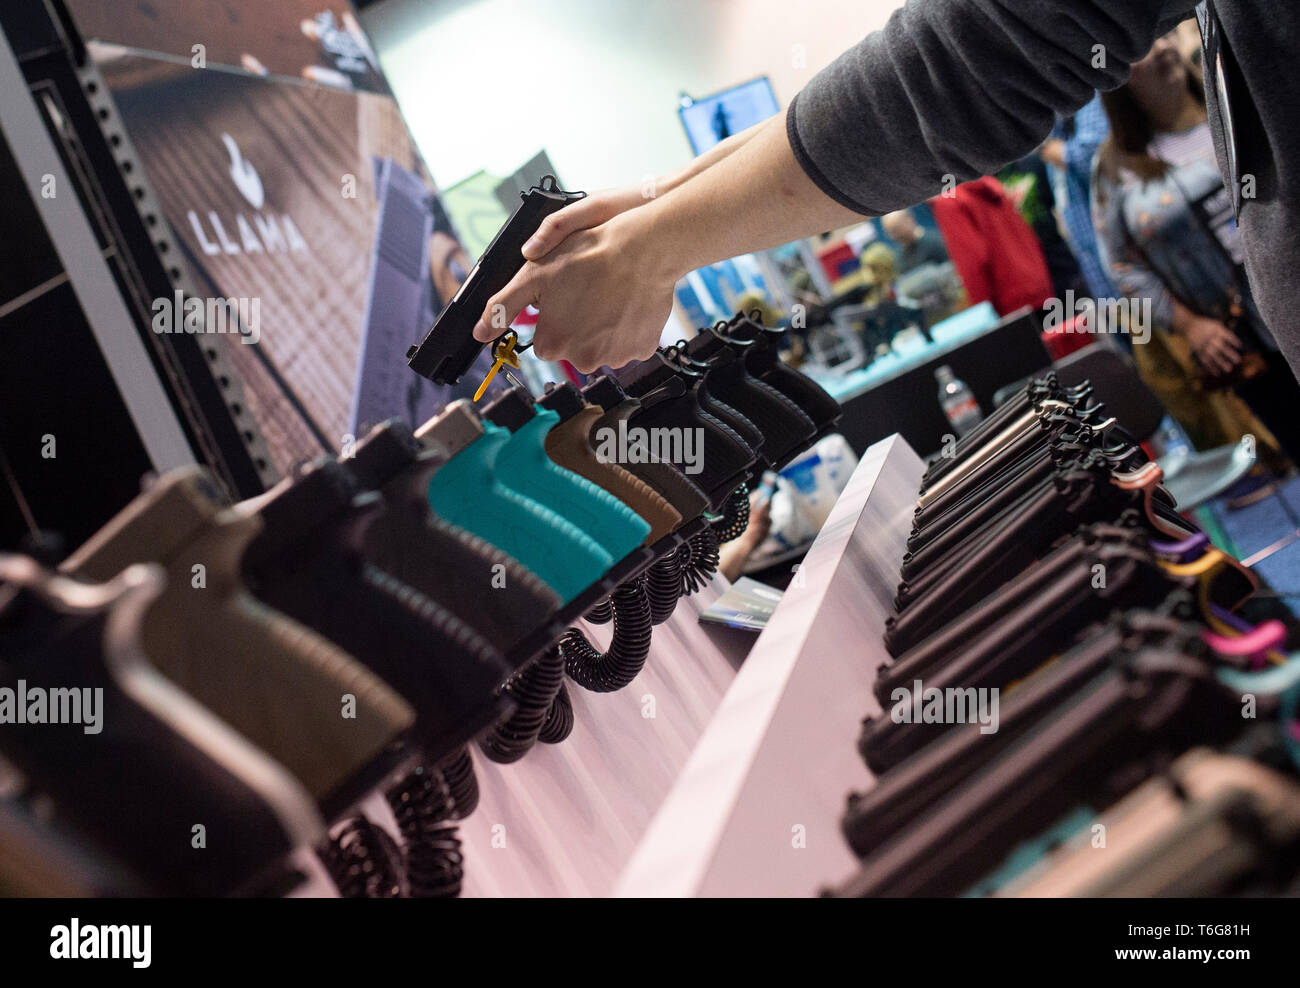 NRA members are seen checking out weapons and accessories during an exhibition. NRA members and leaders gather in Indianapolis, Indiana for the annual NRA Meeting where President Donald Trump and others spoke and attendees were able to view a multitude of exhibits featuring firearms, outdoors equipment, and shooting gear. Stock Photo